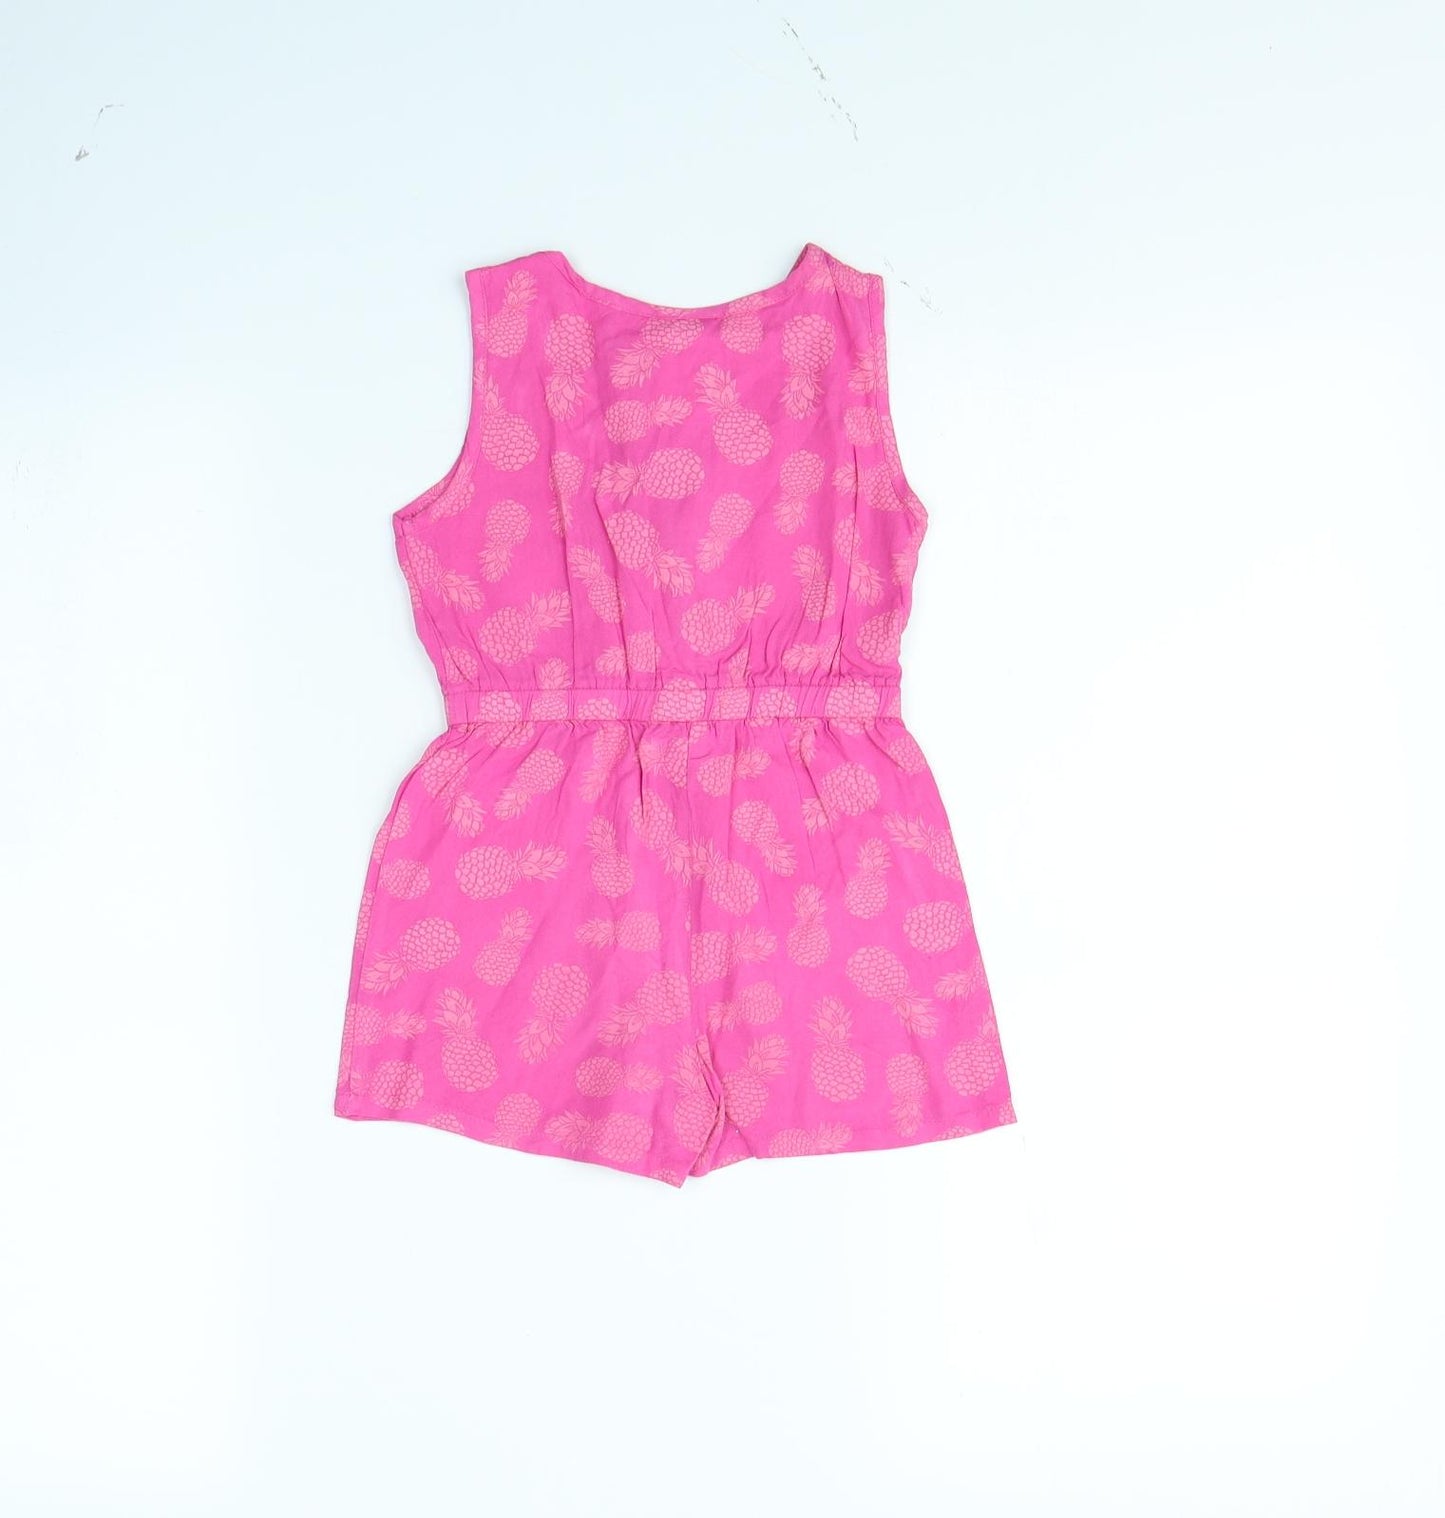 Evie Girls Pink Spotted  Playsuit One-Piece Size 2 Years  - Pineapple